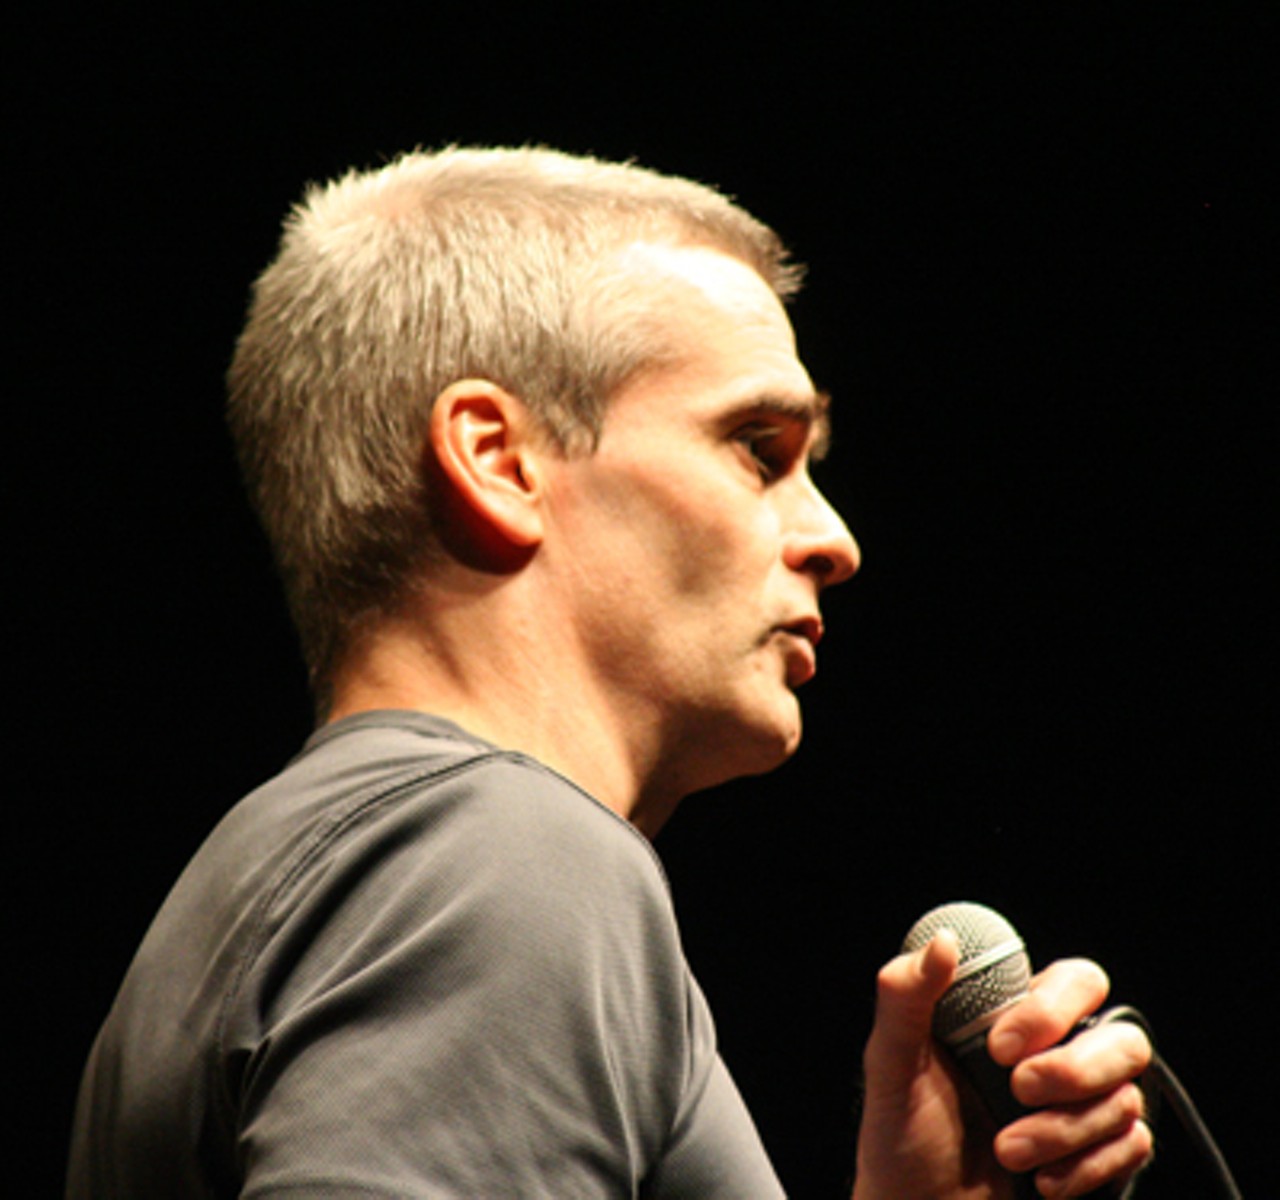 Henry Rollins. 
Read a recap of Rollins' spoken word performance in A to Z.
Read an interview with Rollins in this week's edition, "Get in the Van: Henry Rollins &mdash; musician, spoken-word artist, writer and punk legend &mdash; talks about life on the road.". 
We also posted outtakes from that interview in A to Z.